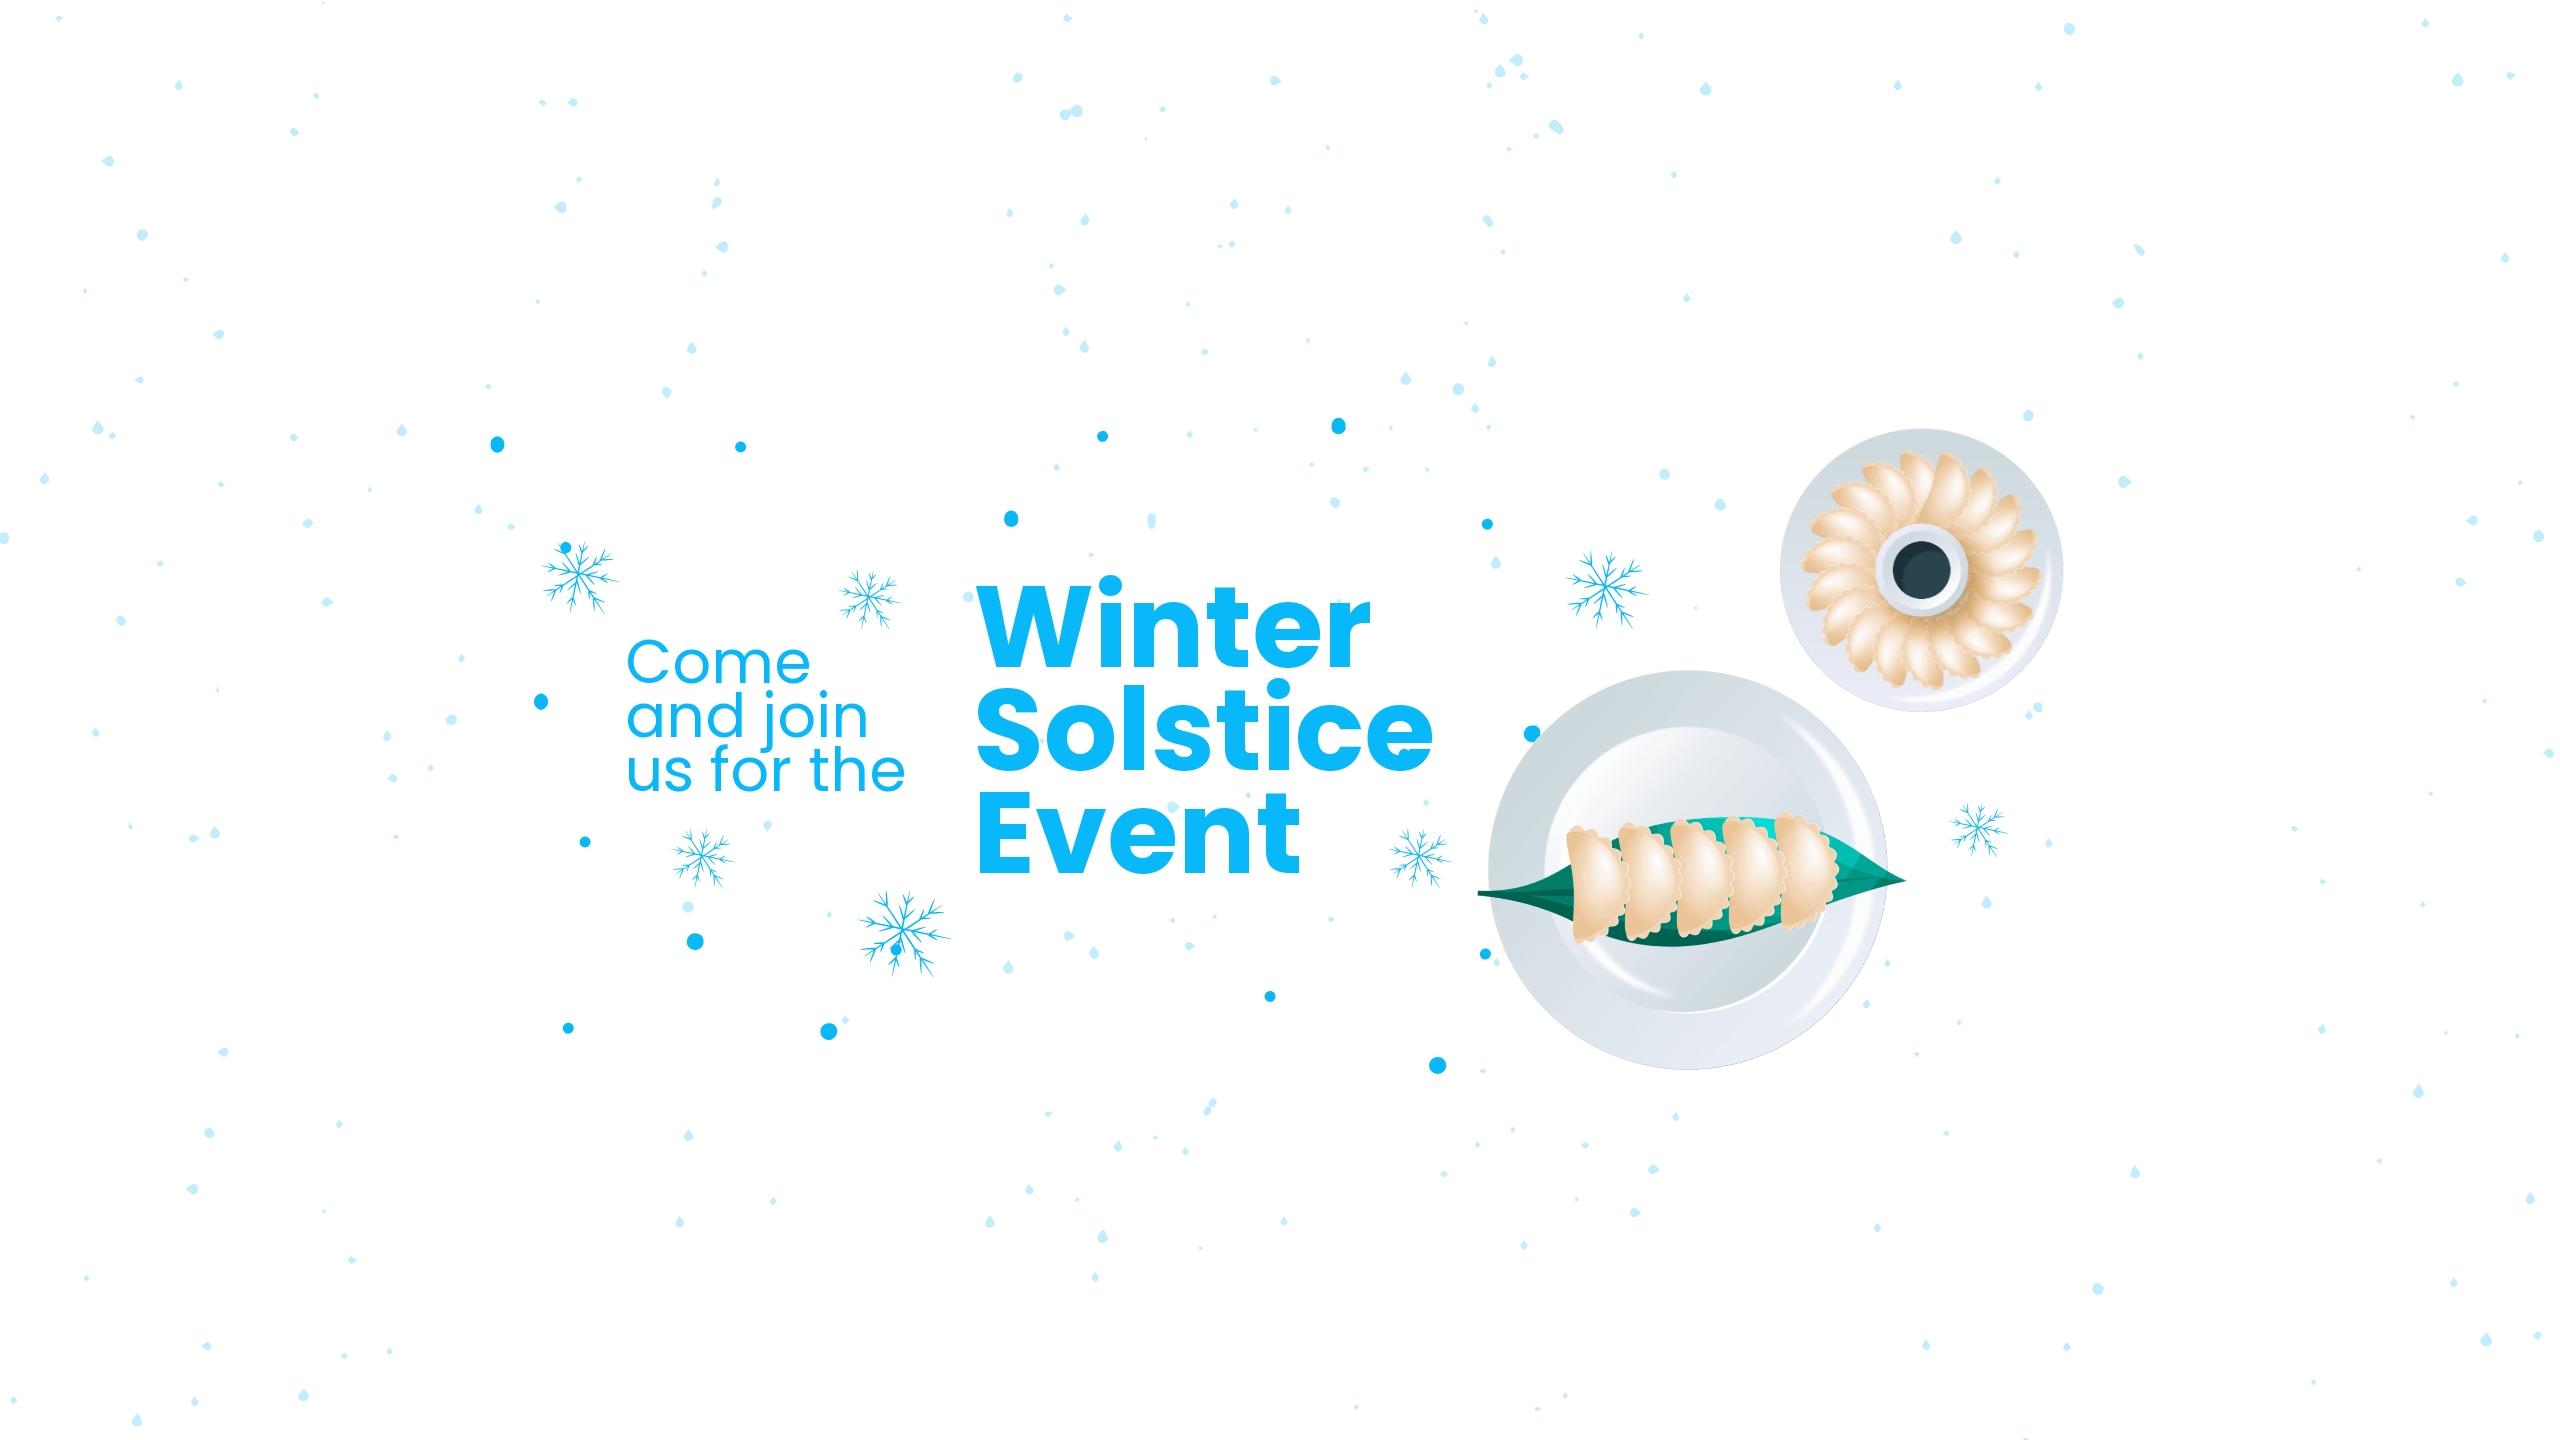 Free Winter Solstice Event  Banner Template - Download in PNG, JPG